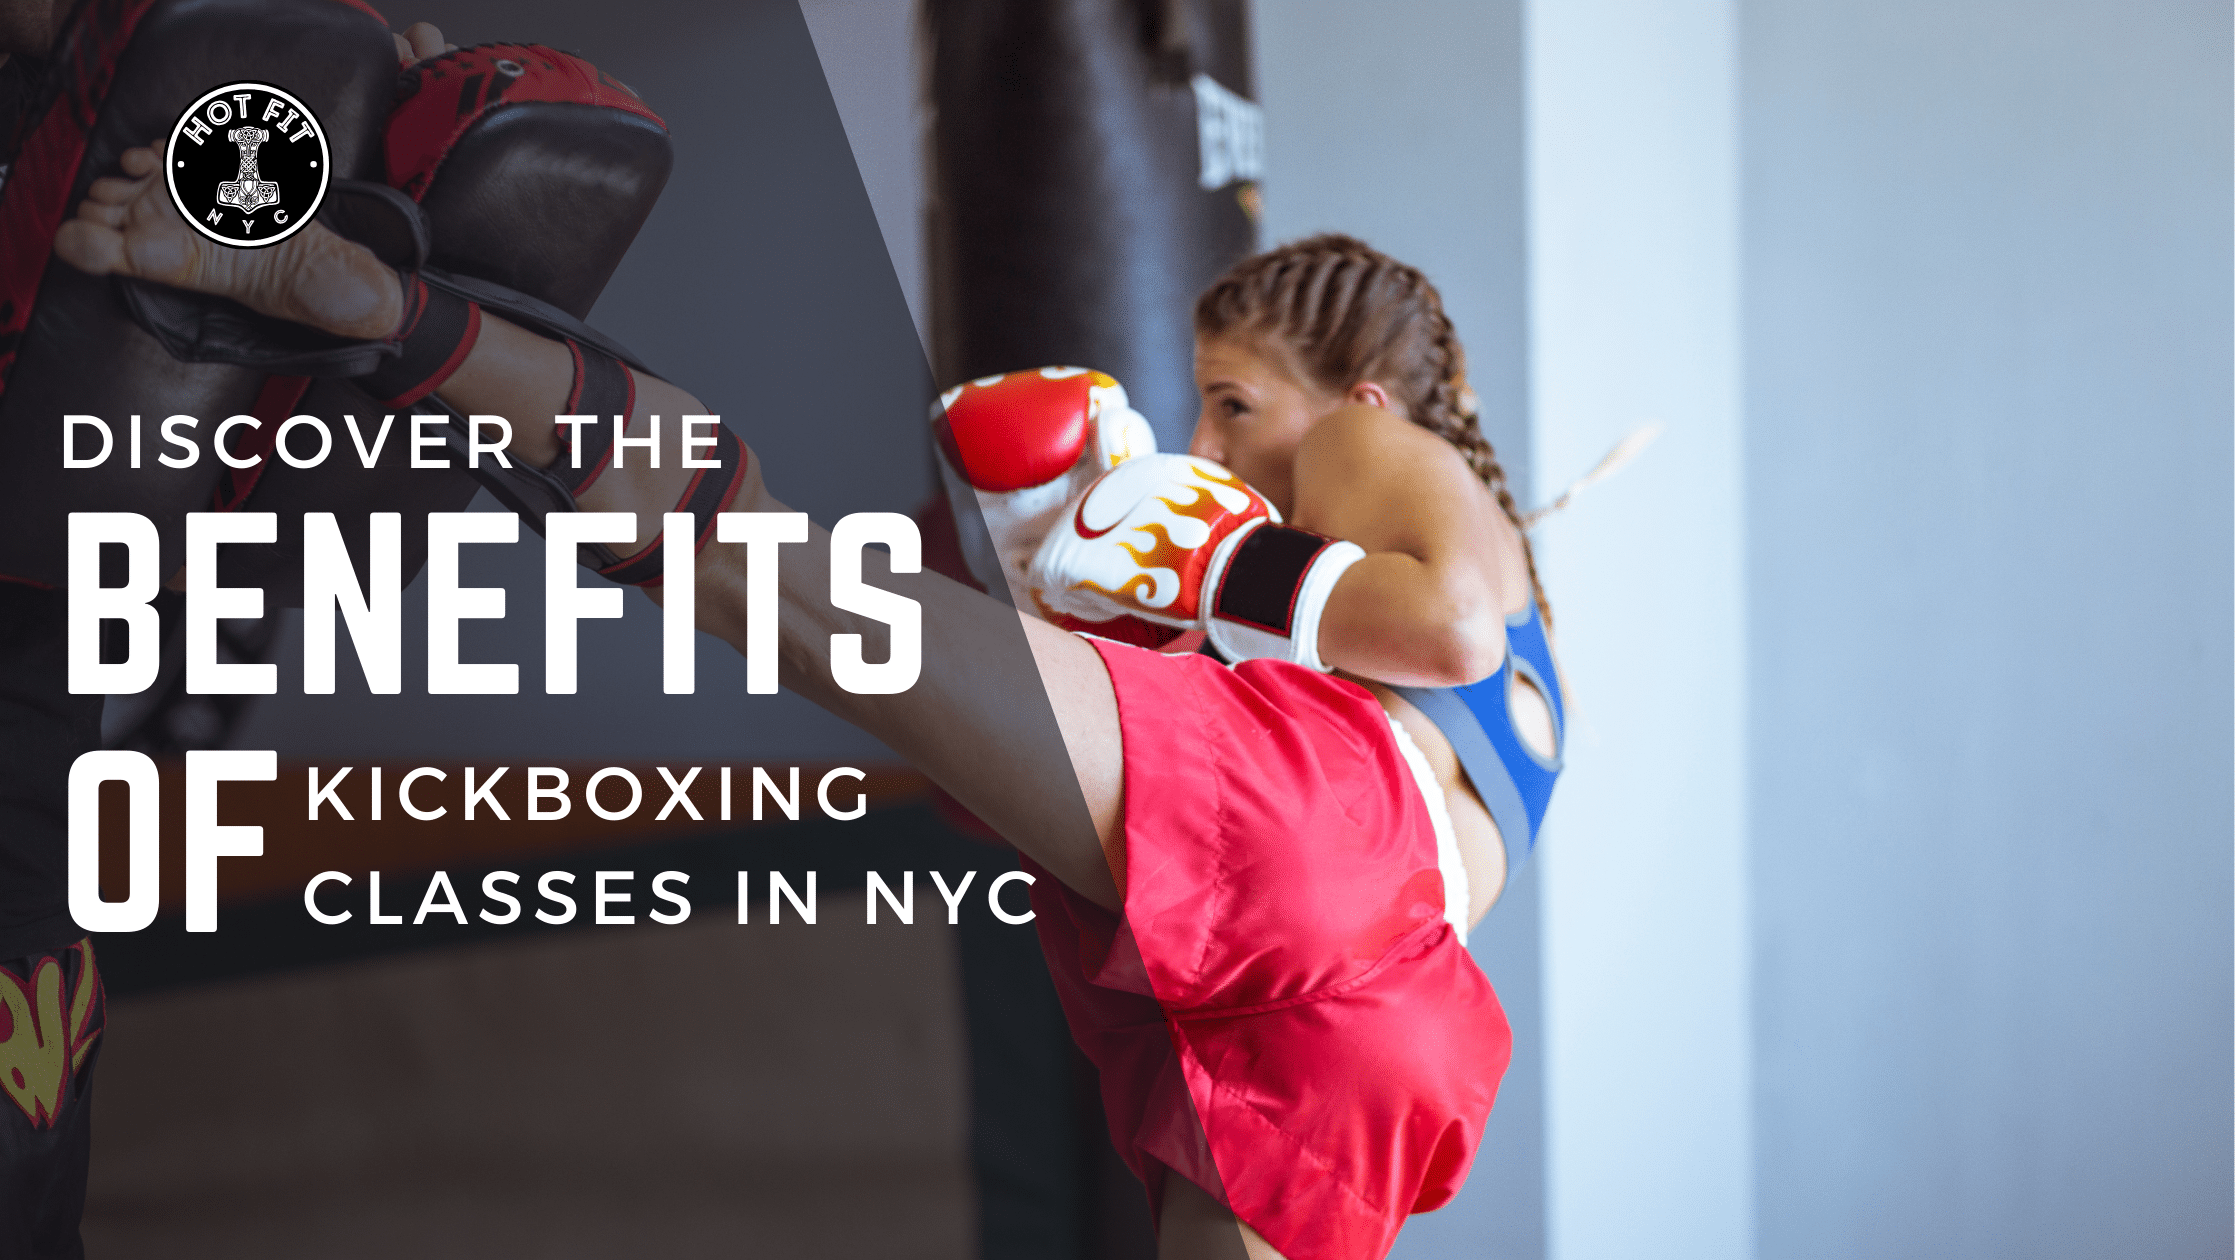 Discover the Benefits of Kickboxing Classes in NYC